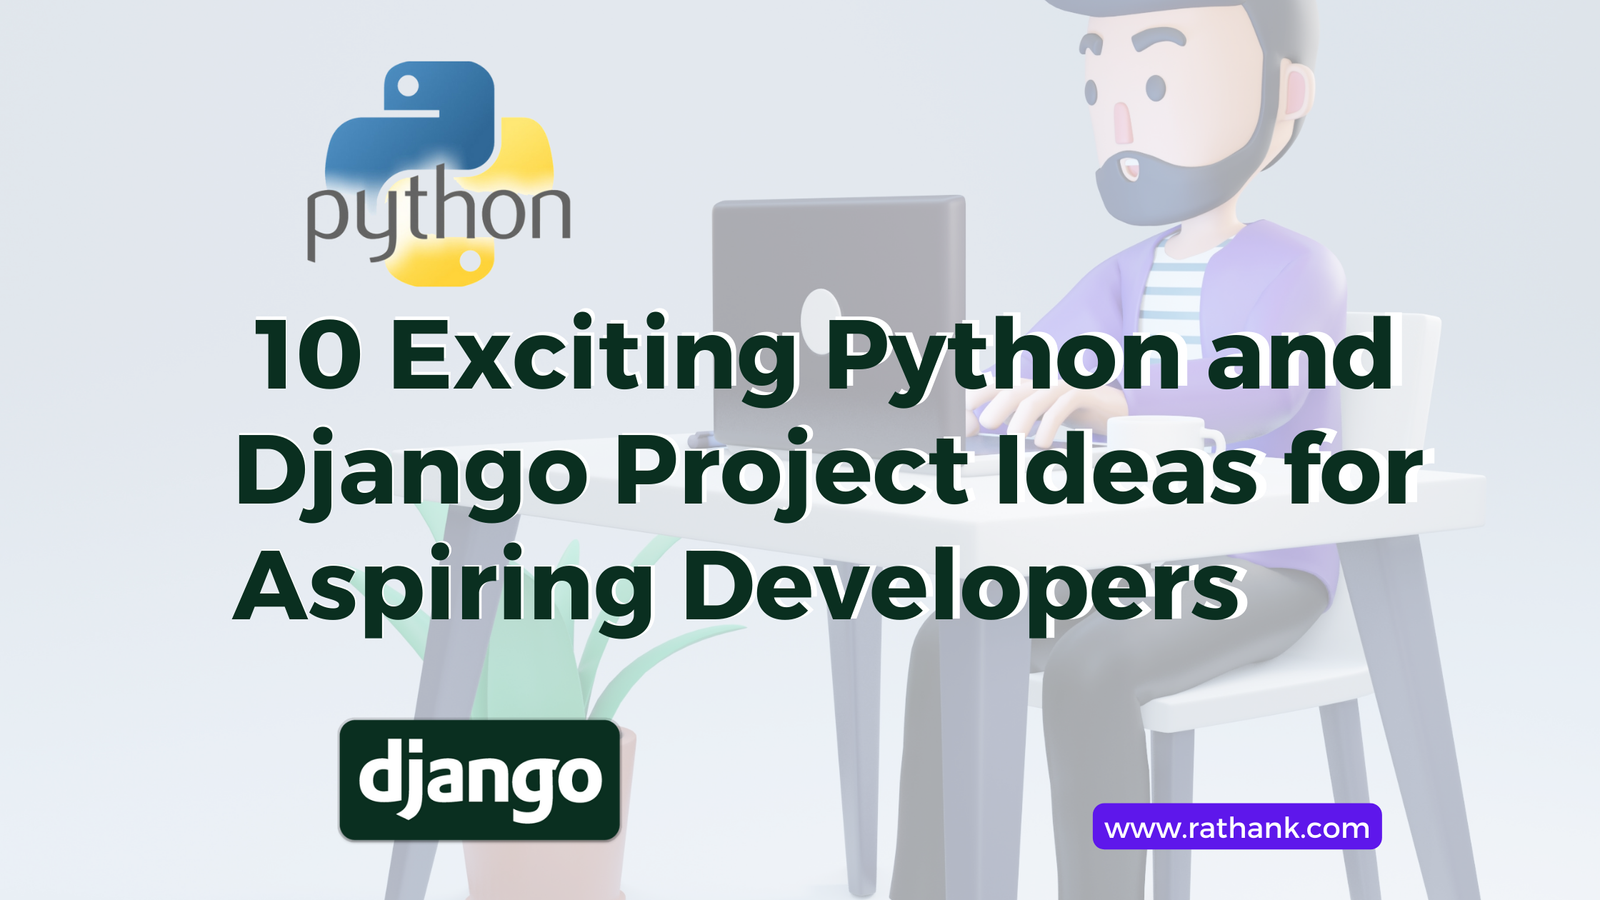 10 Exciting Python and Django Project Ideas for Aspiring Developers